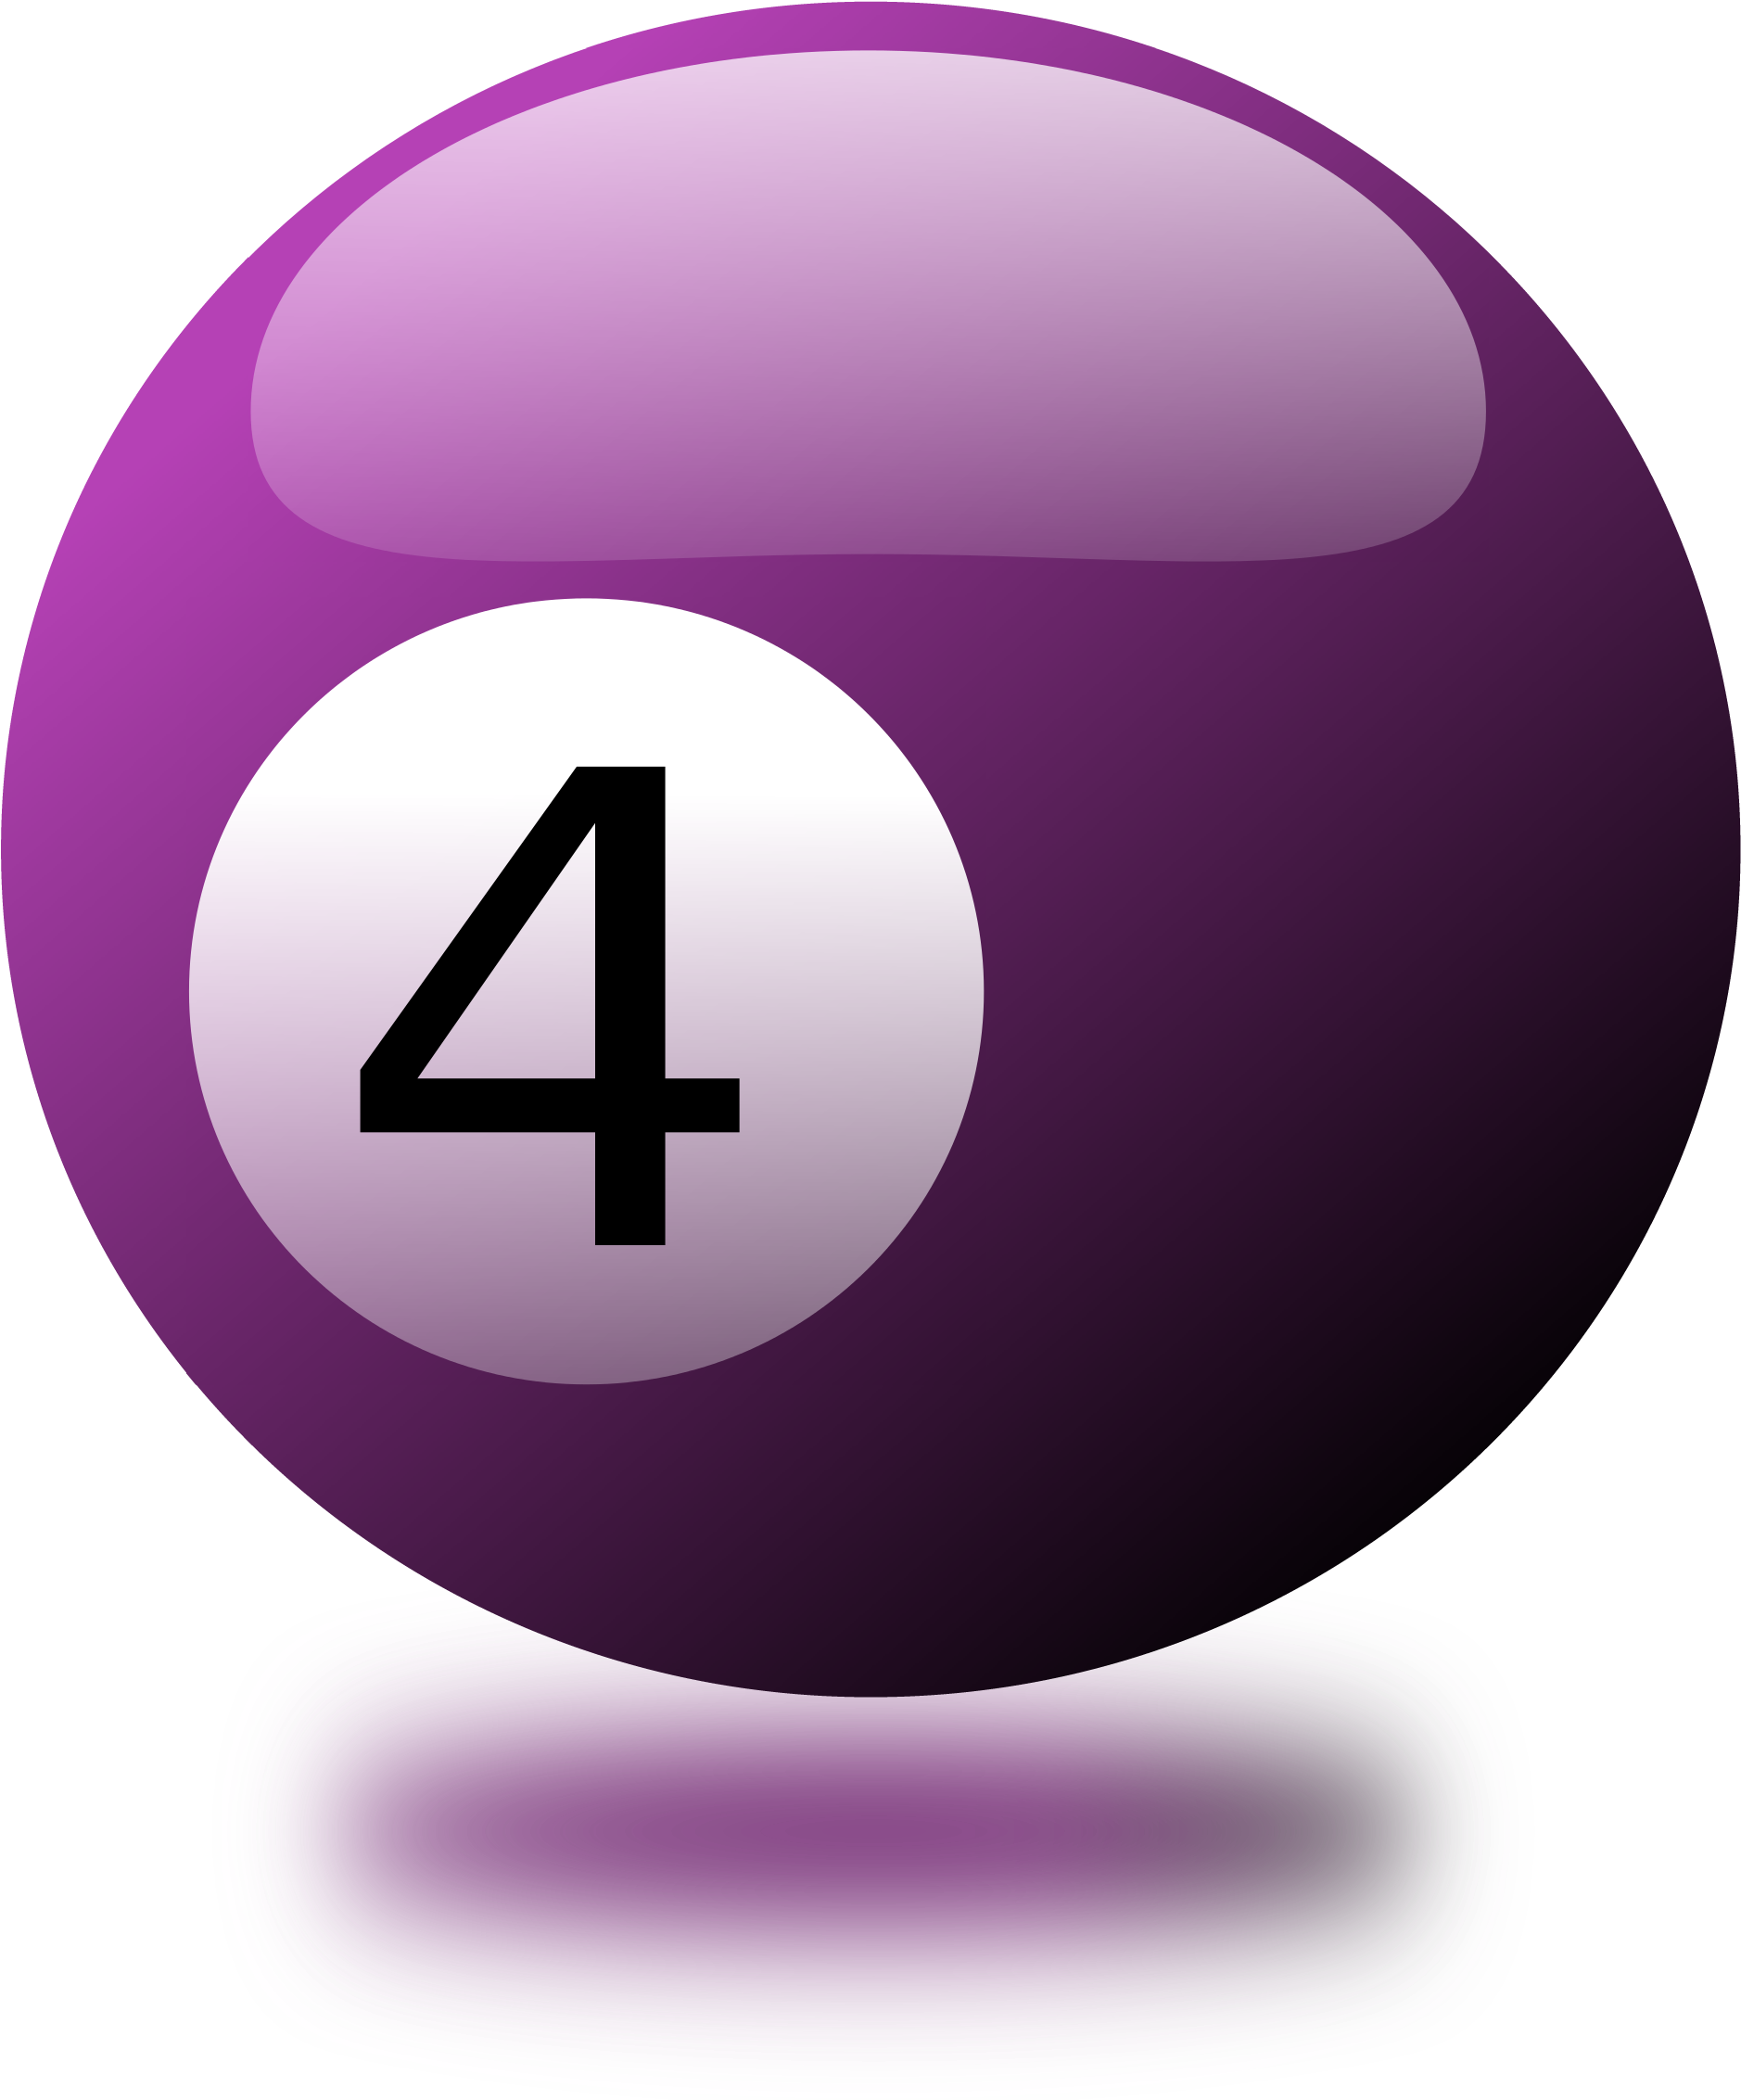 A Purple Billiard Ball With A Number On It